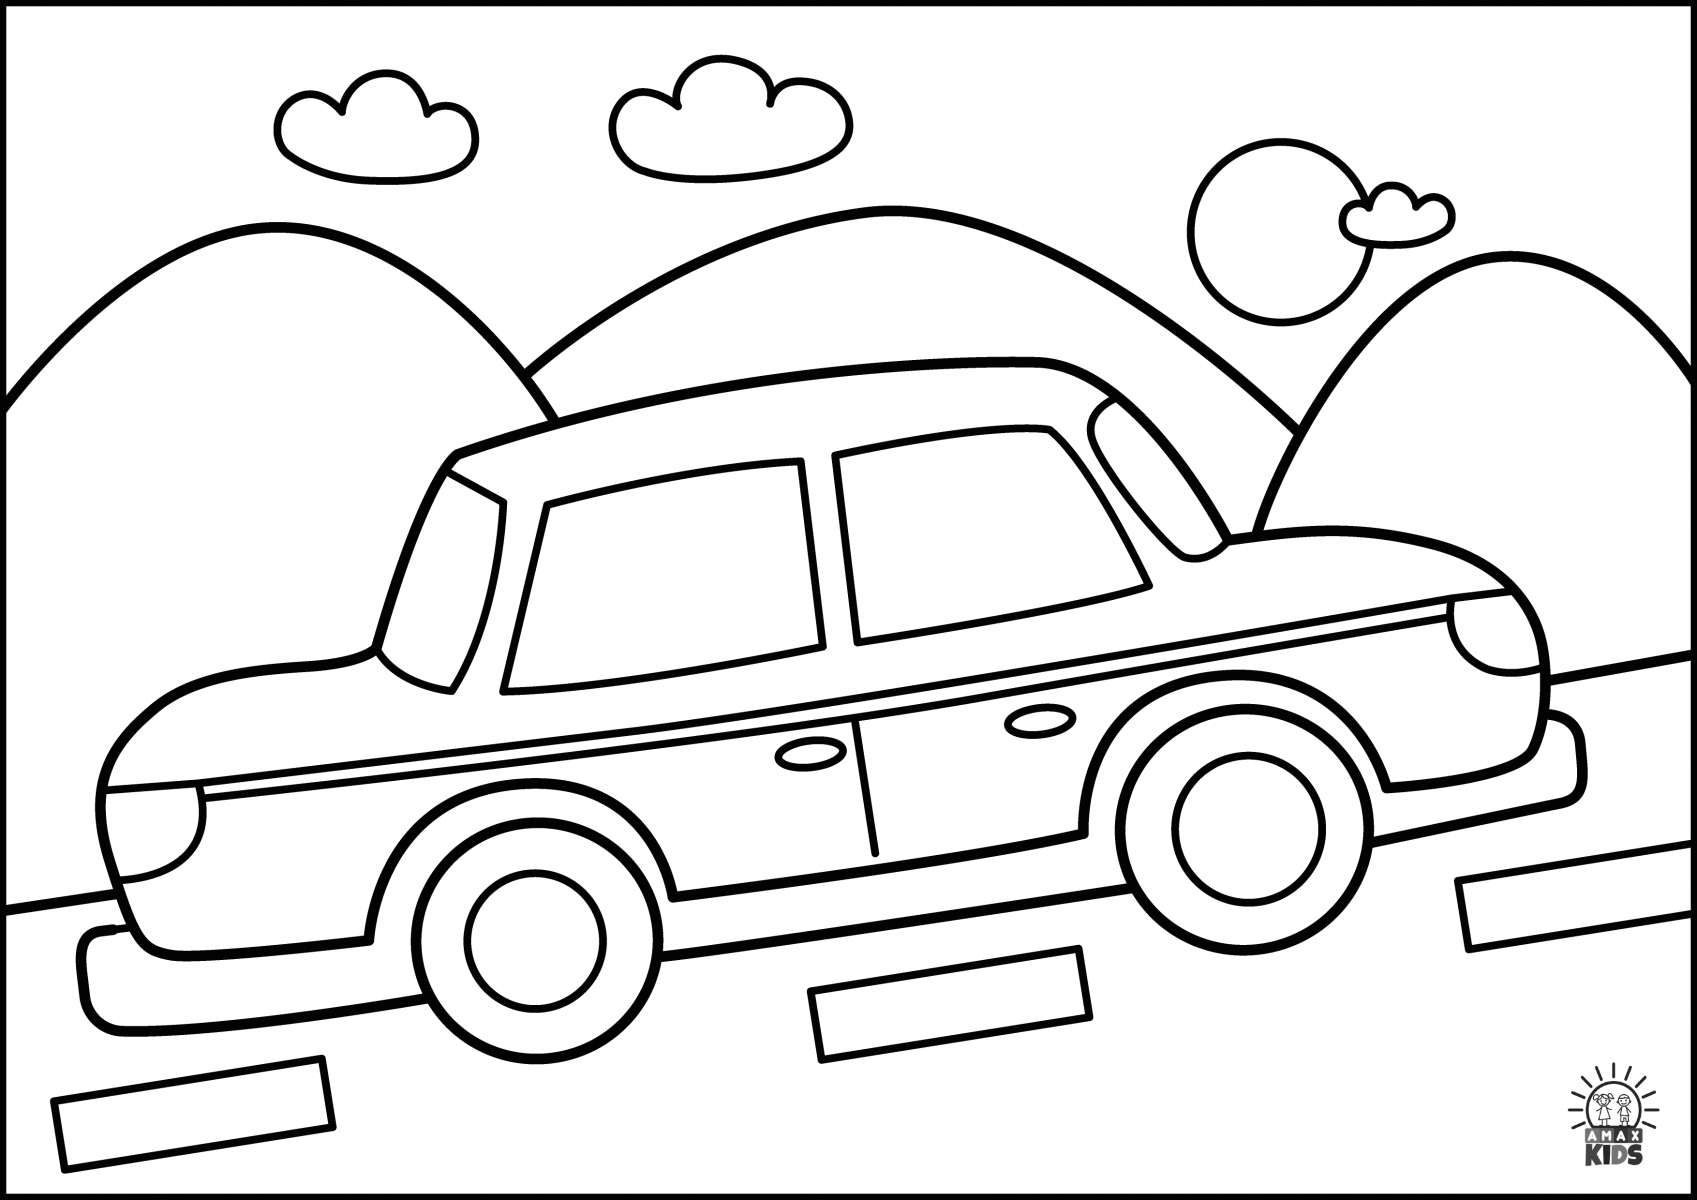 Download Coloring pages for kids - Transport | Amax Kids